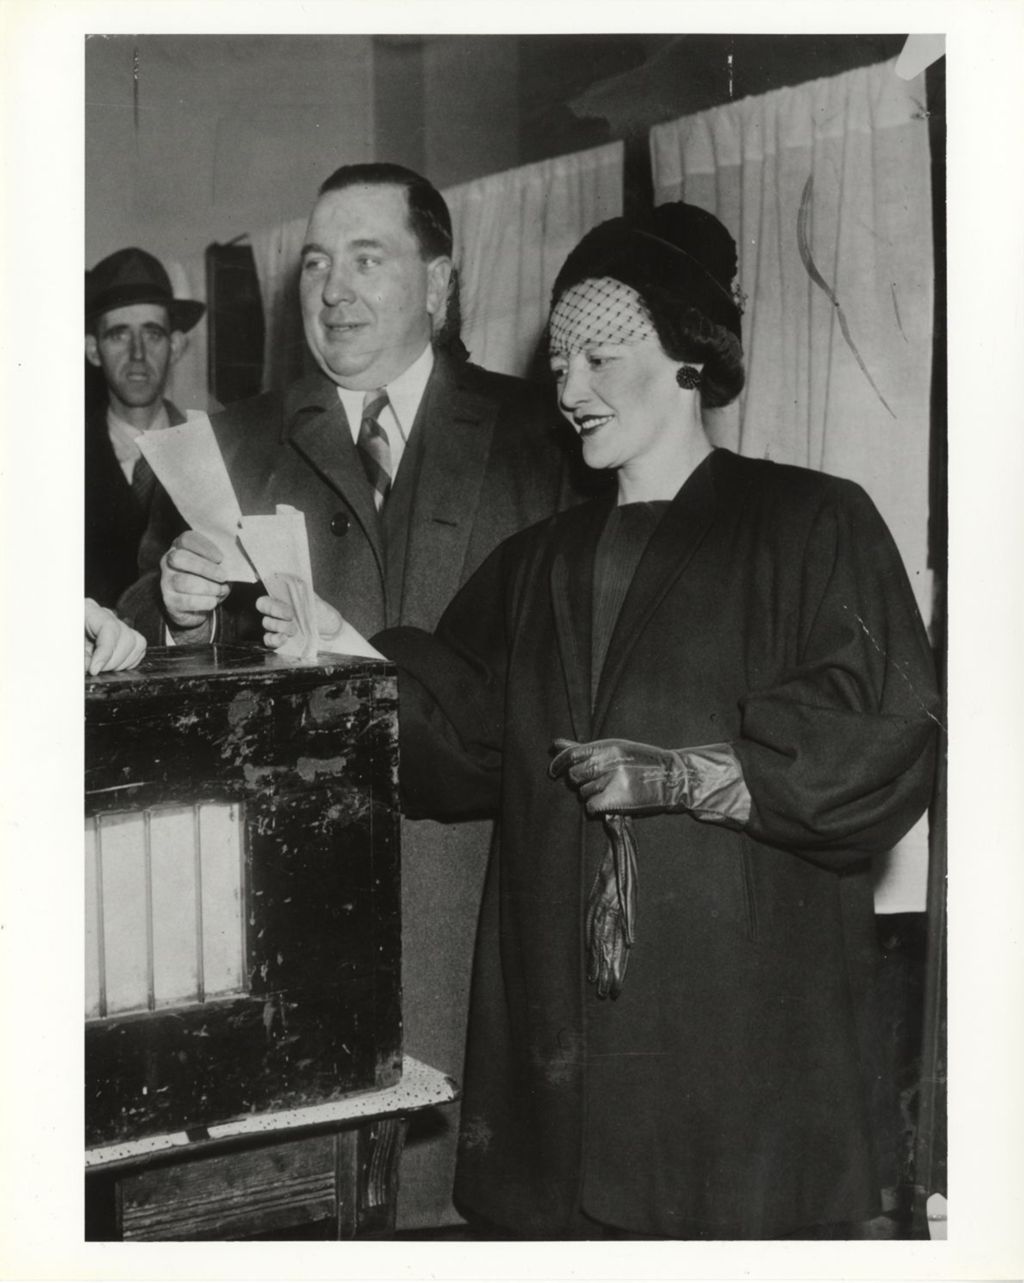 Miniature of Richard J. Daley and Eleanor Daley voting